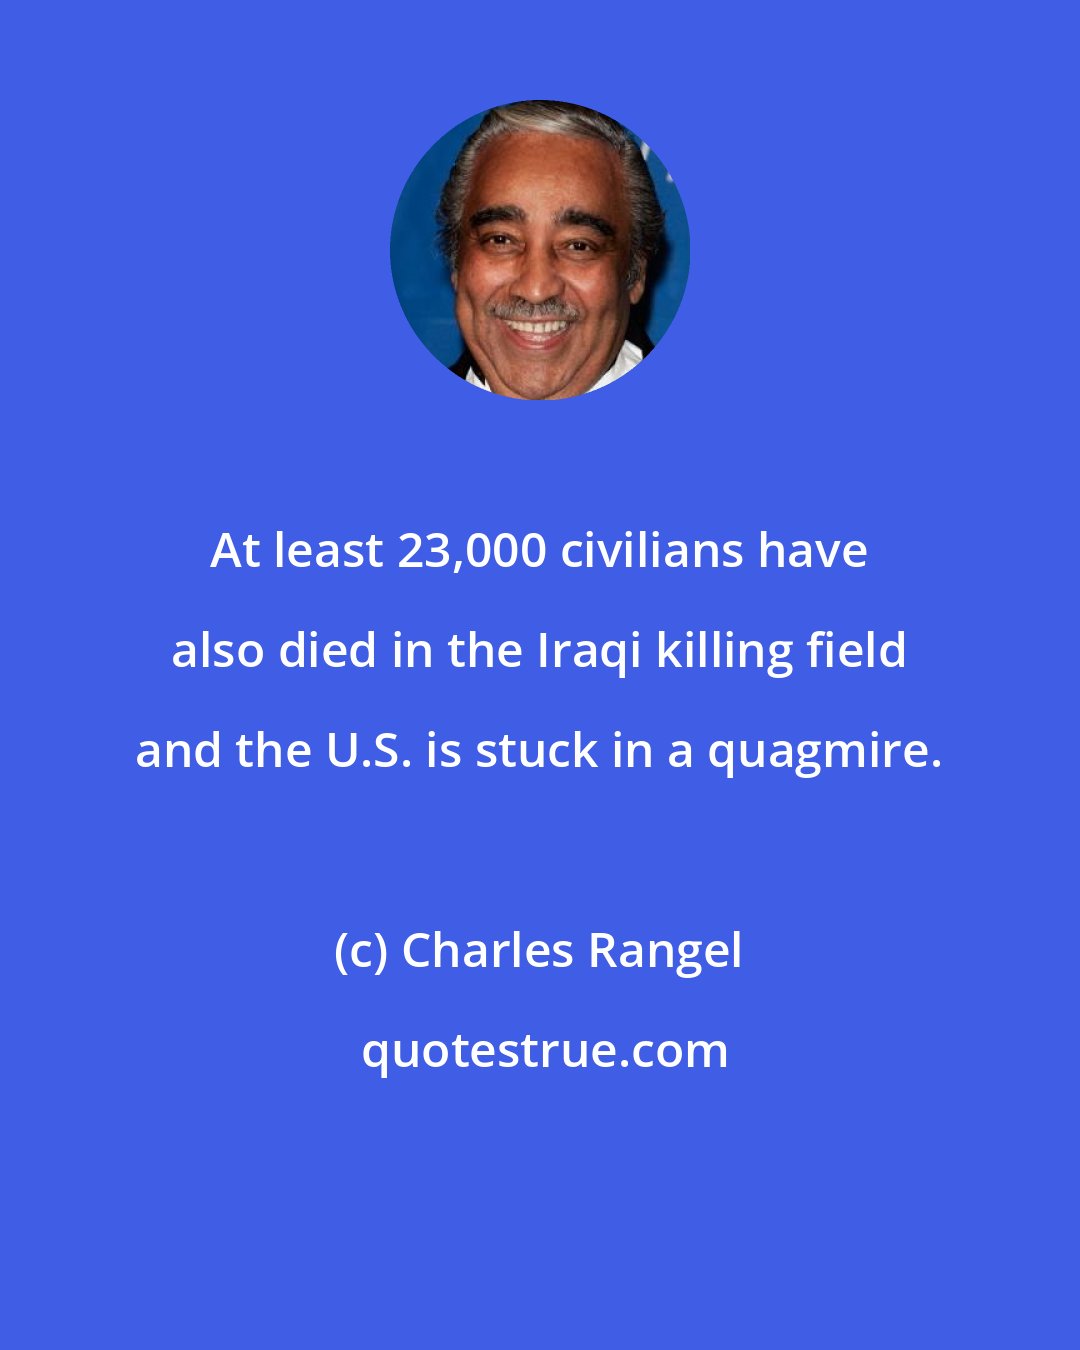 Charles Rangel: At least 23,000 civilians have also died in the Iraqi killing field and the U.S. is stuck in a quagmire.